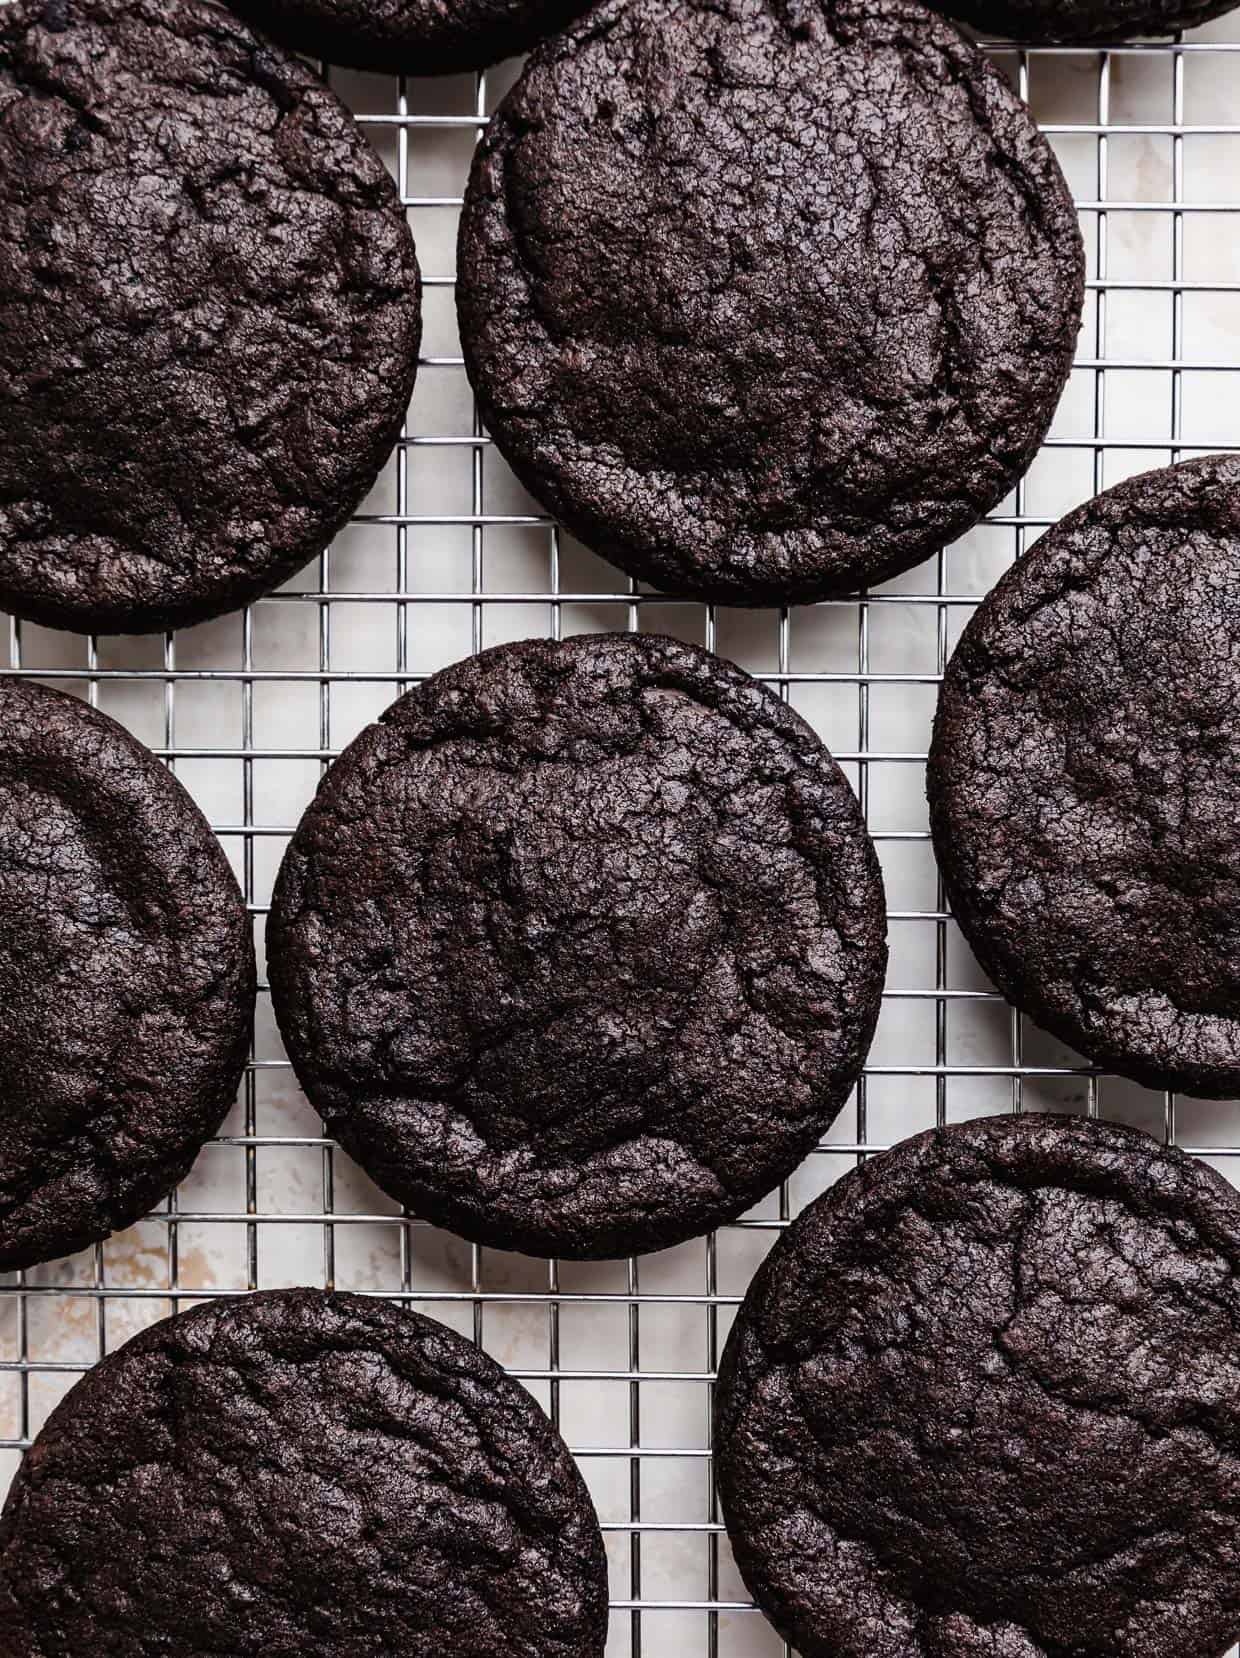 Baked dark Oreo cookies on a wire cooling rack.